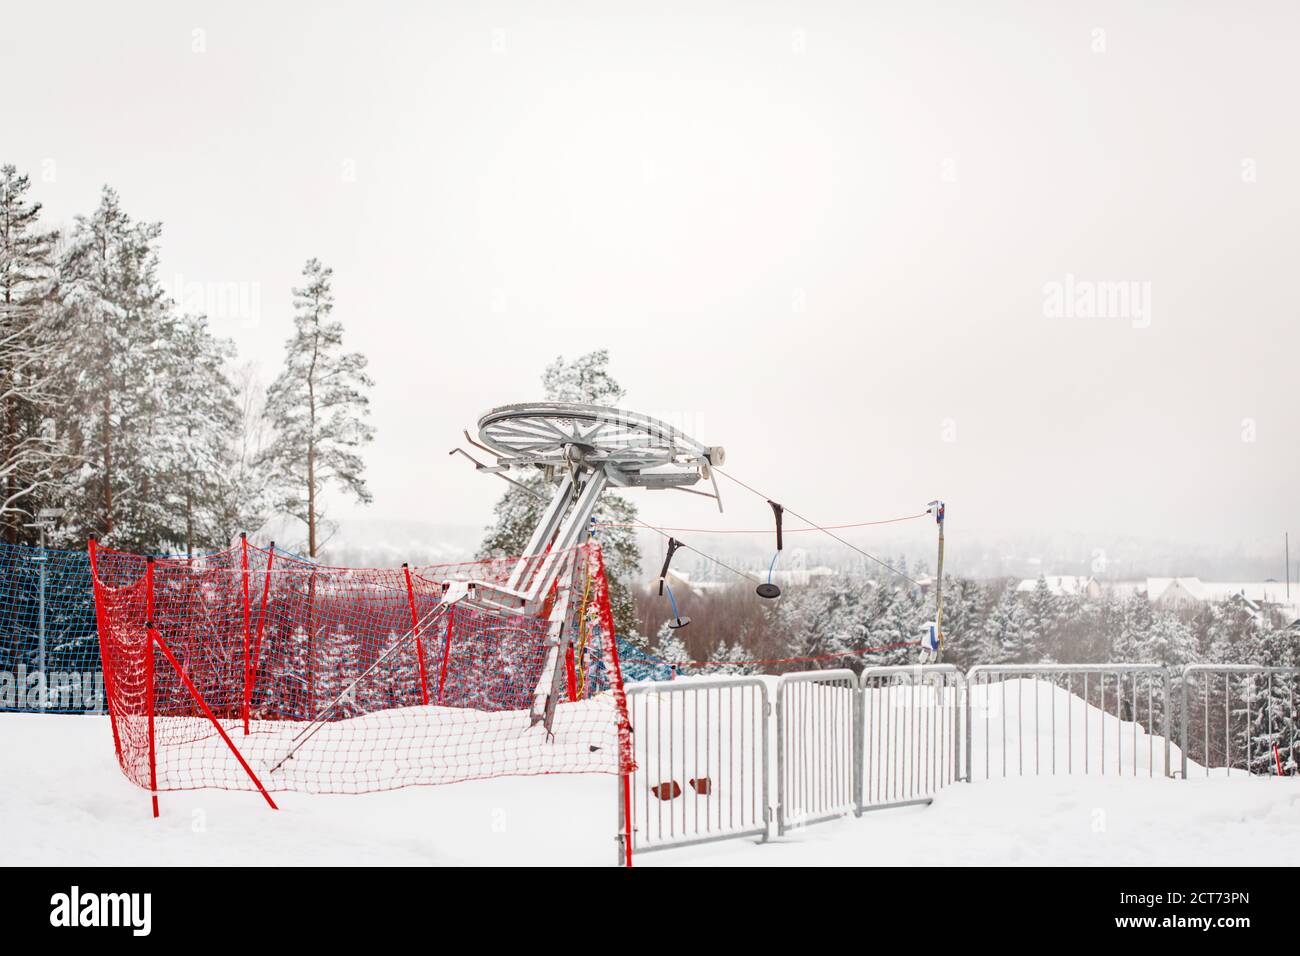 Winter landscape with yoke ski lifts in snowy forest Stock Photo